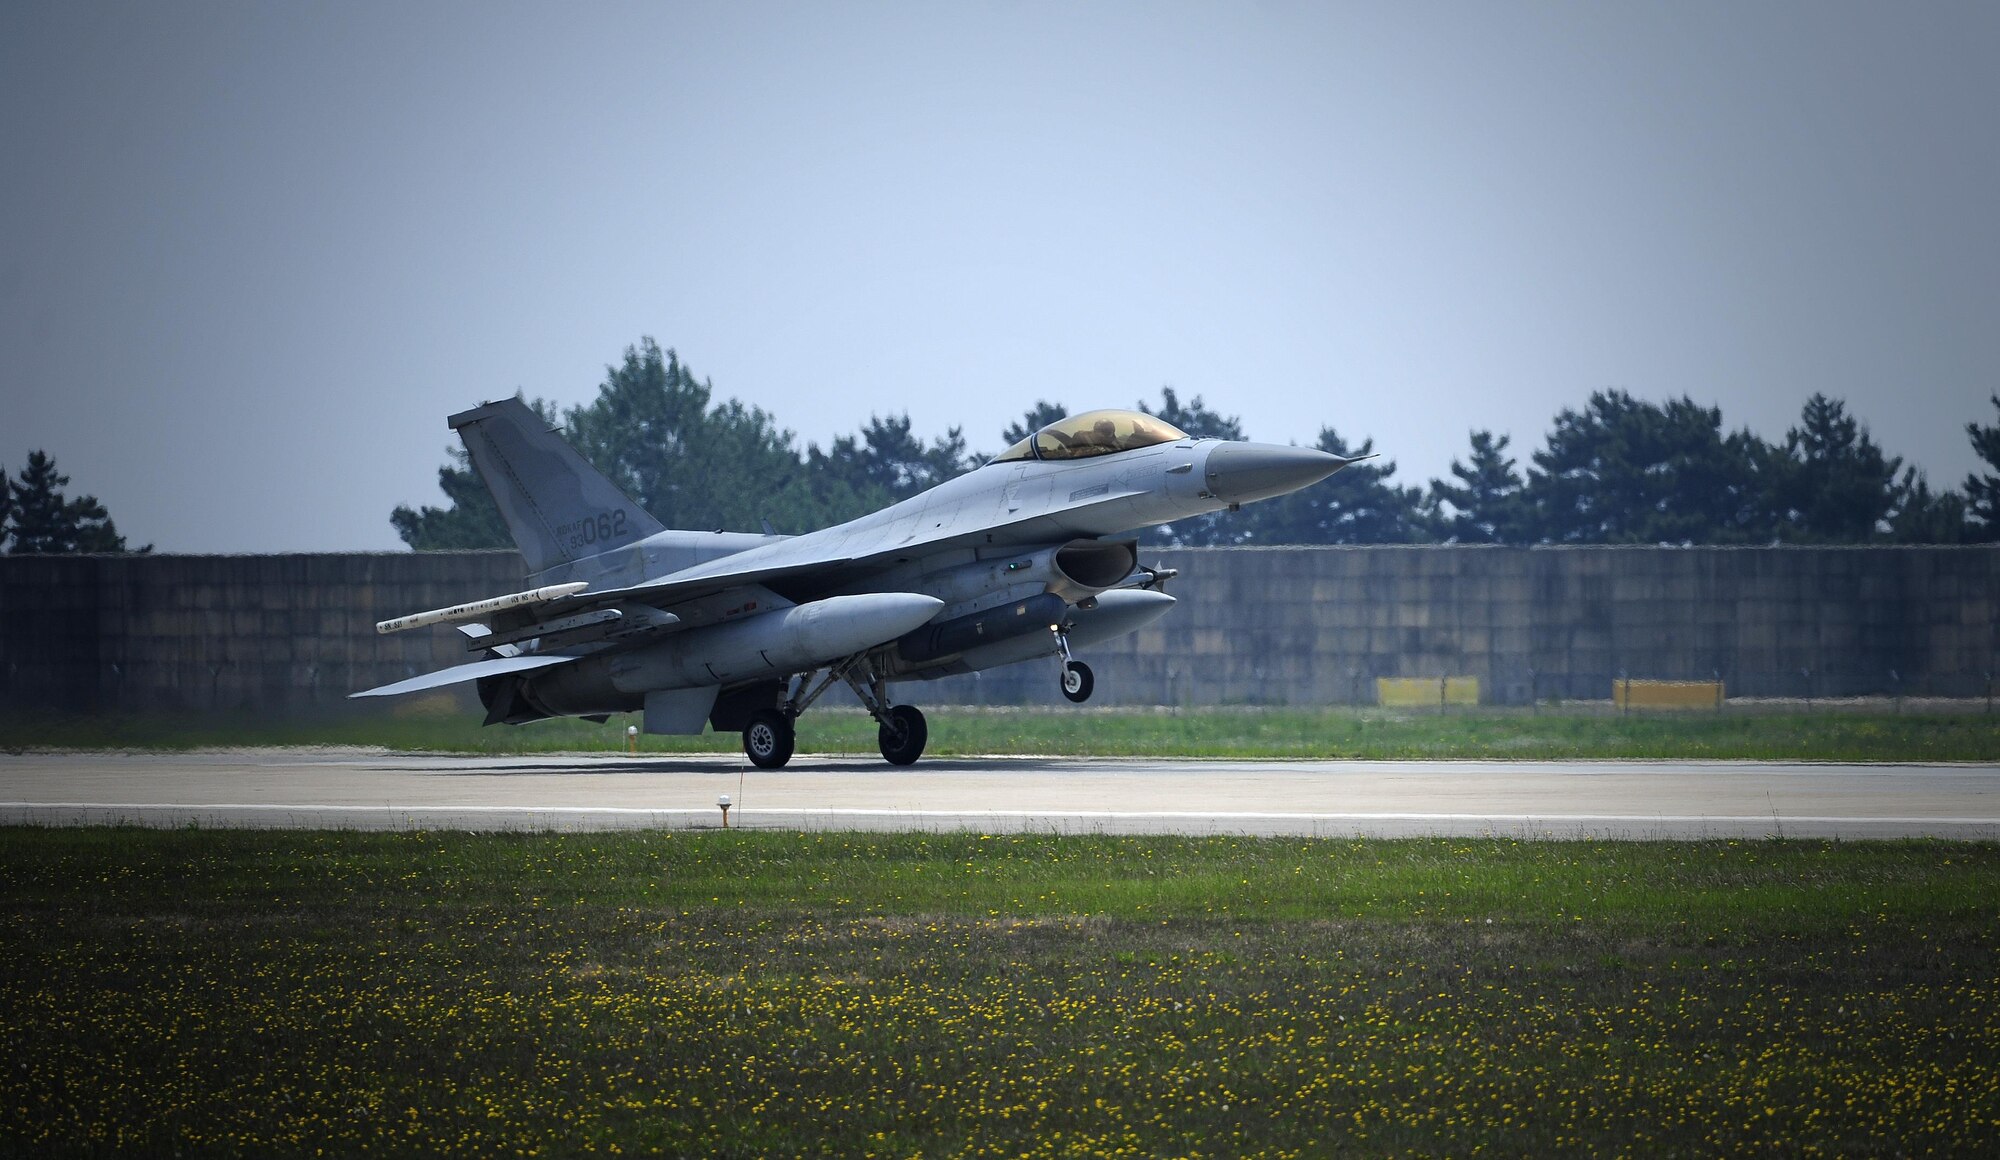 A South Korean air force F-16 Fighting Falcon from the 123rd Tactical Fighter Squadron arrives at Kunsan Air Base, South Korea, for exercise Buddy Wing 15-4, June 1, 2015. South Korean pilots routinely train with U.S. Air Force pilots to enhance interoperability and sharpen their combined airpower skills during Buddy Wing exercises multiple times throughout the year. (U.S. Air Force photo/Staff Sgt. Nick Wilson)